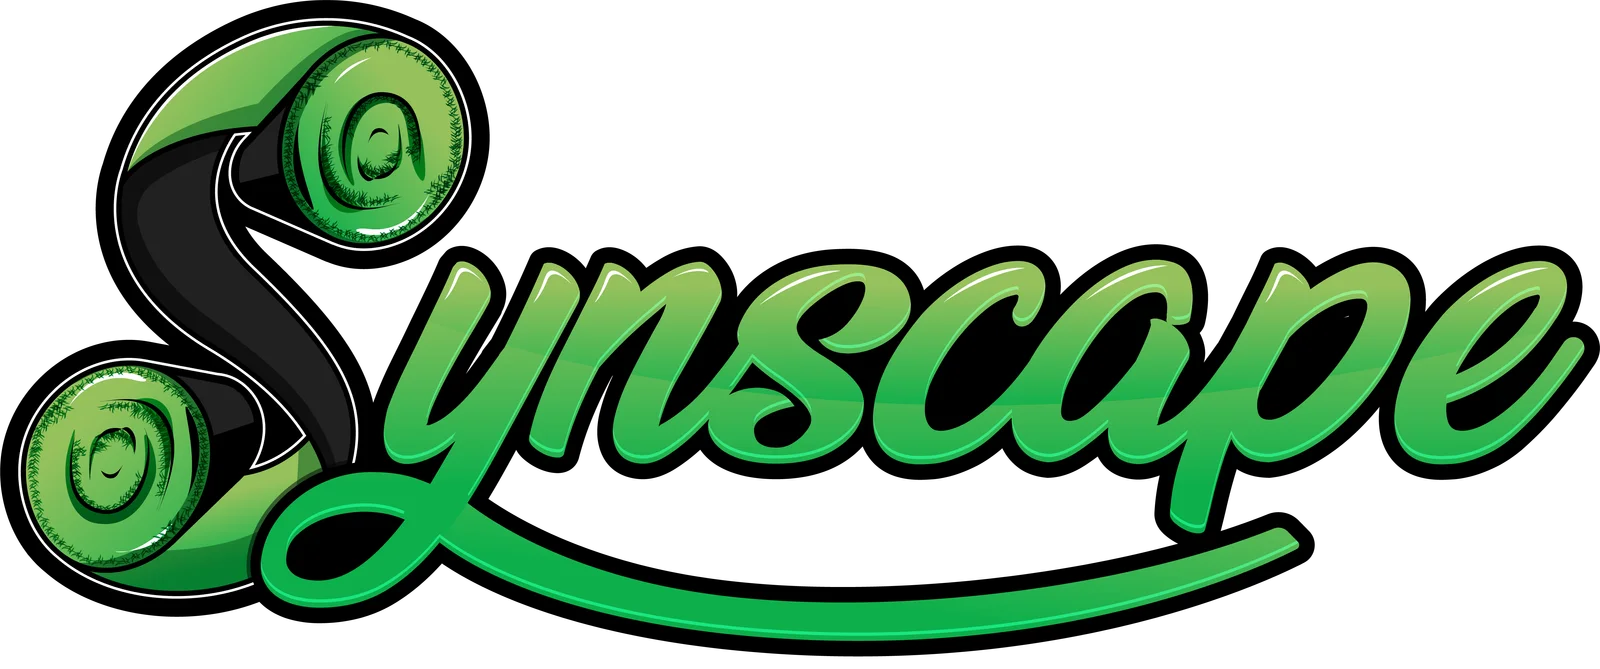 Synscape: The Top Choice for Synthetic Turf in the Greater Okanagan Area